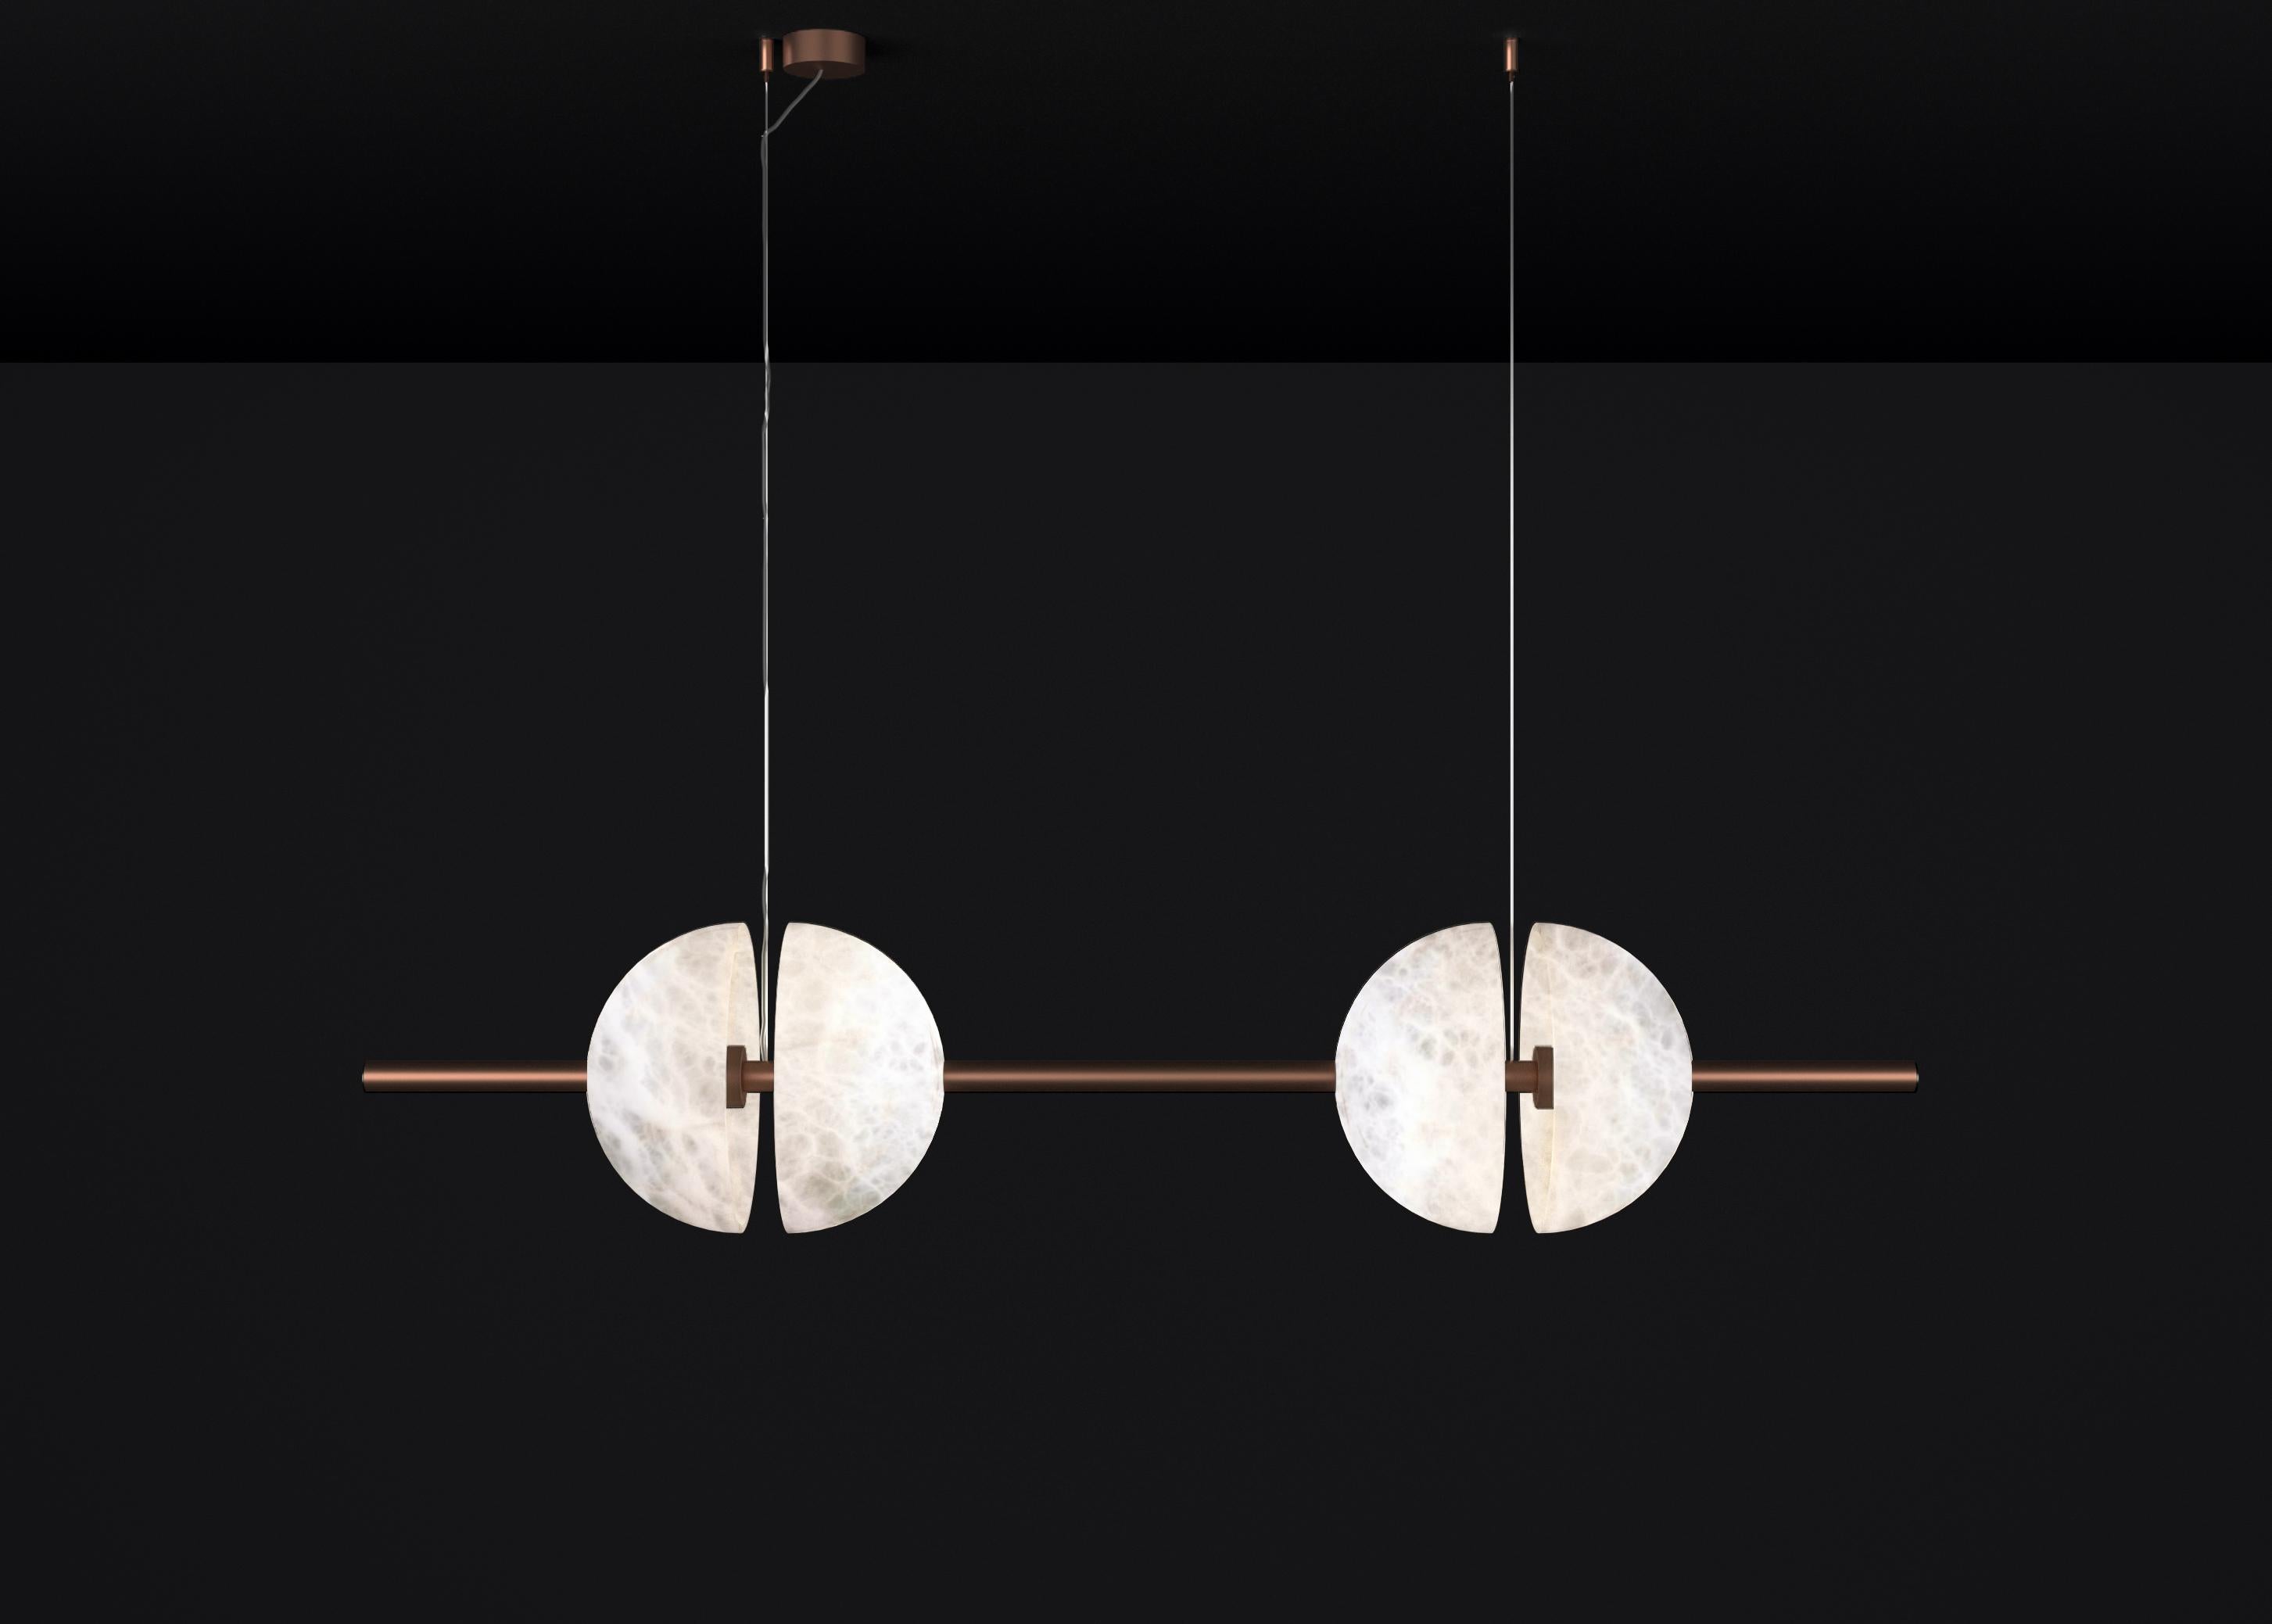 Ermes Copper And Alabaster Pendant Light 1 by Alabastro Italiano
Dimensions: D 30 x W 150 x H 300 cm.
Materials: White alabaster and copper.

Available in different finishes: Shiny Silver, Bronze, Brushed Brass, Ruggine of Florence, Brushed